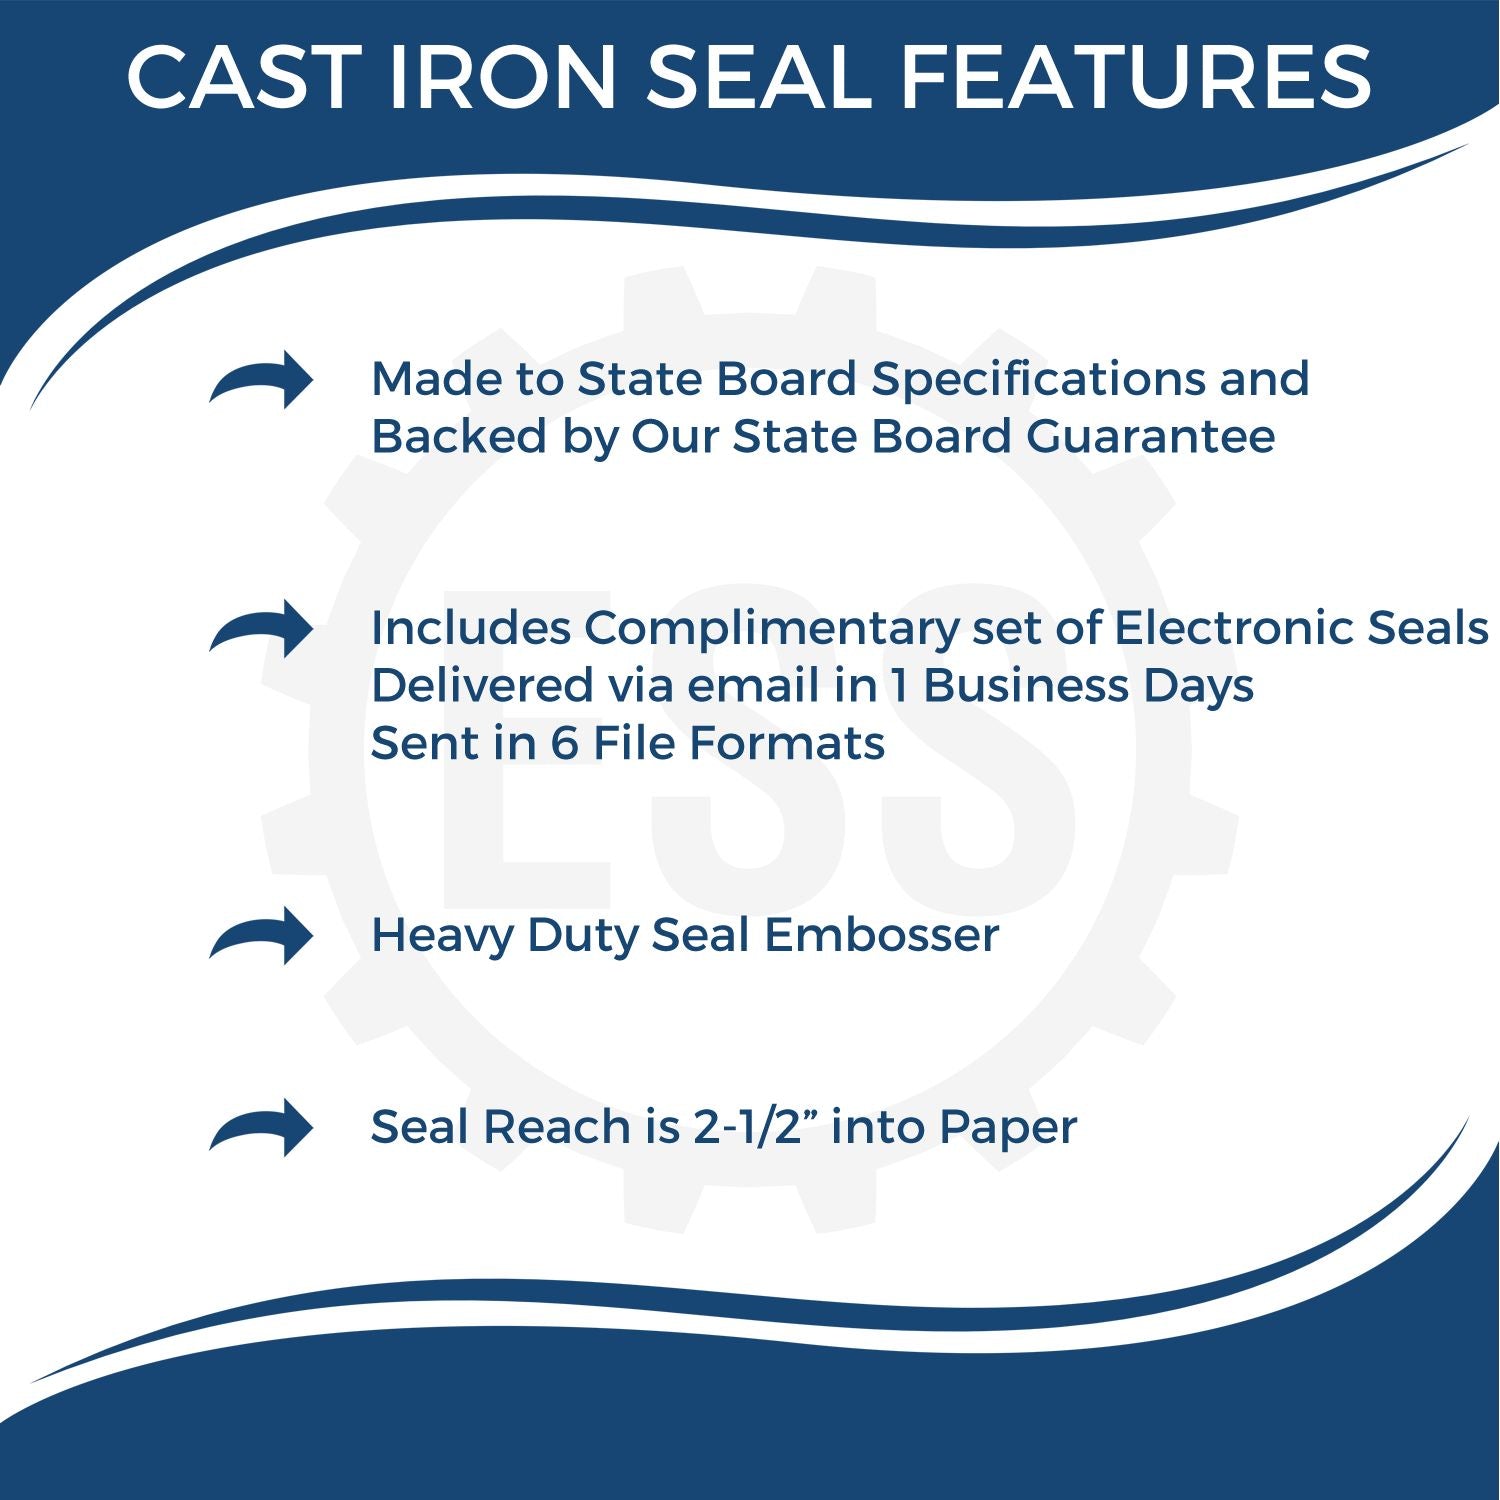 The main image for the Heavy Duty Cast Iron Maryland Engineer Seal Embosser depicting a sample of the imprint and electronic files